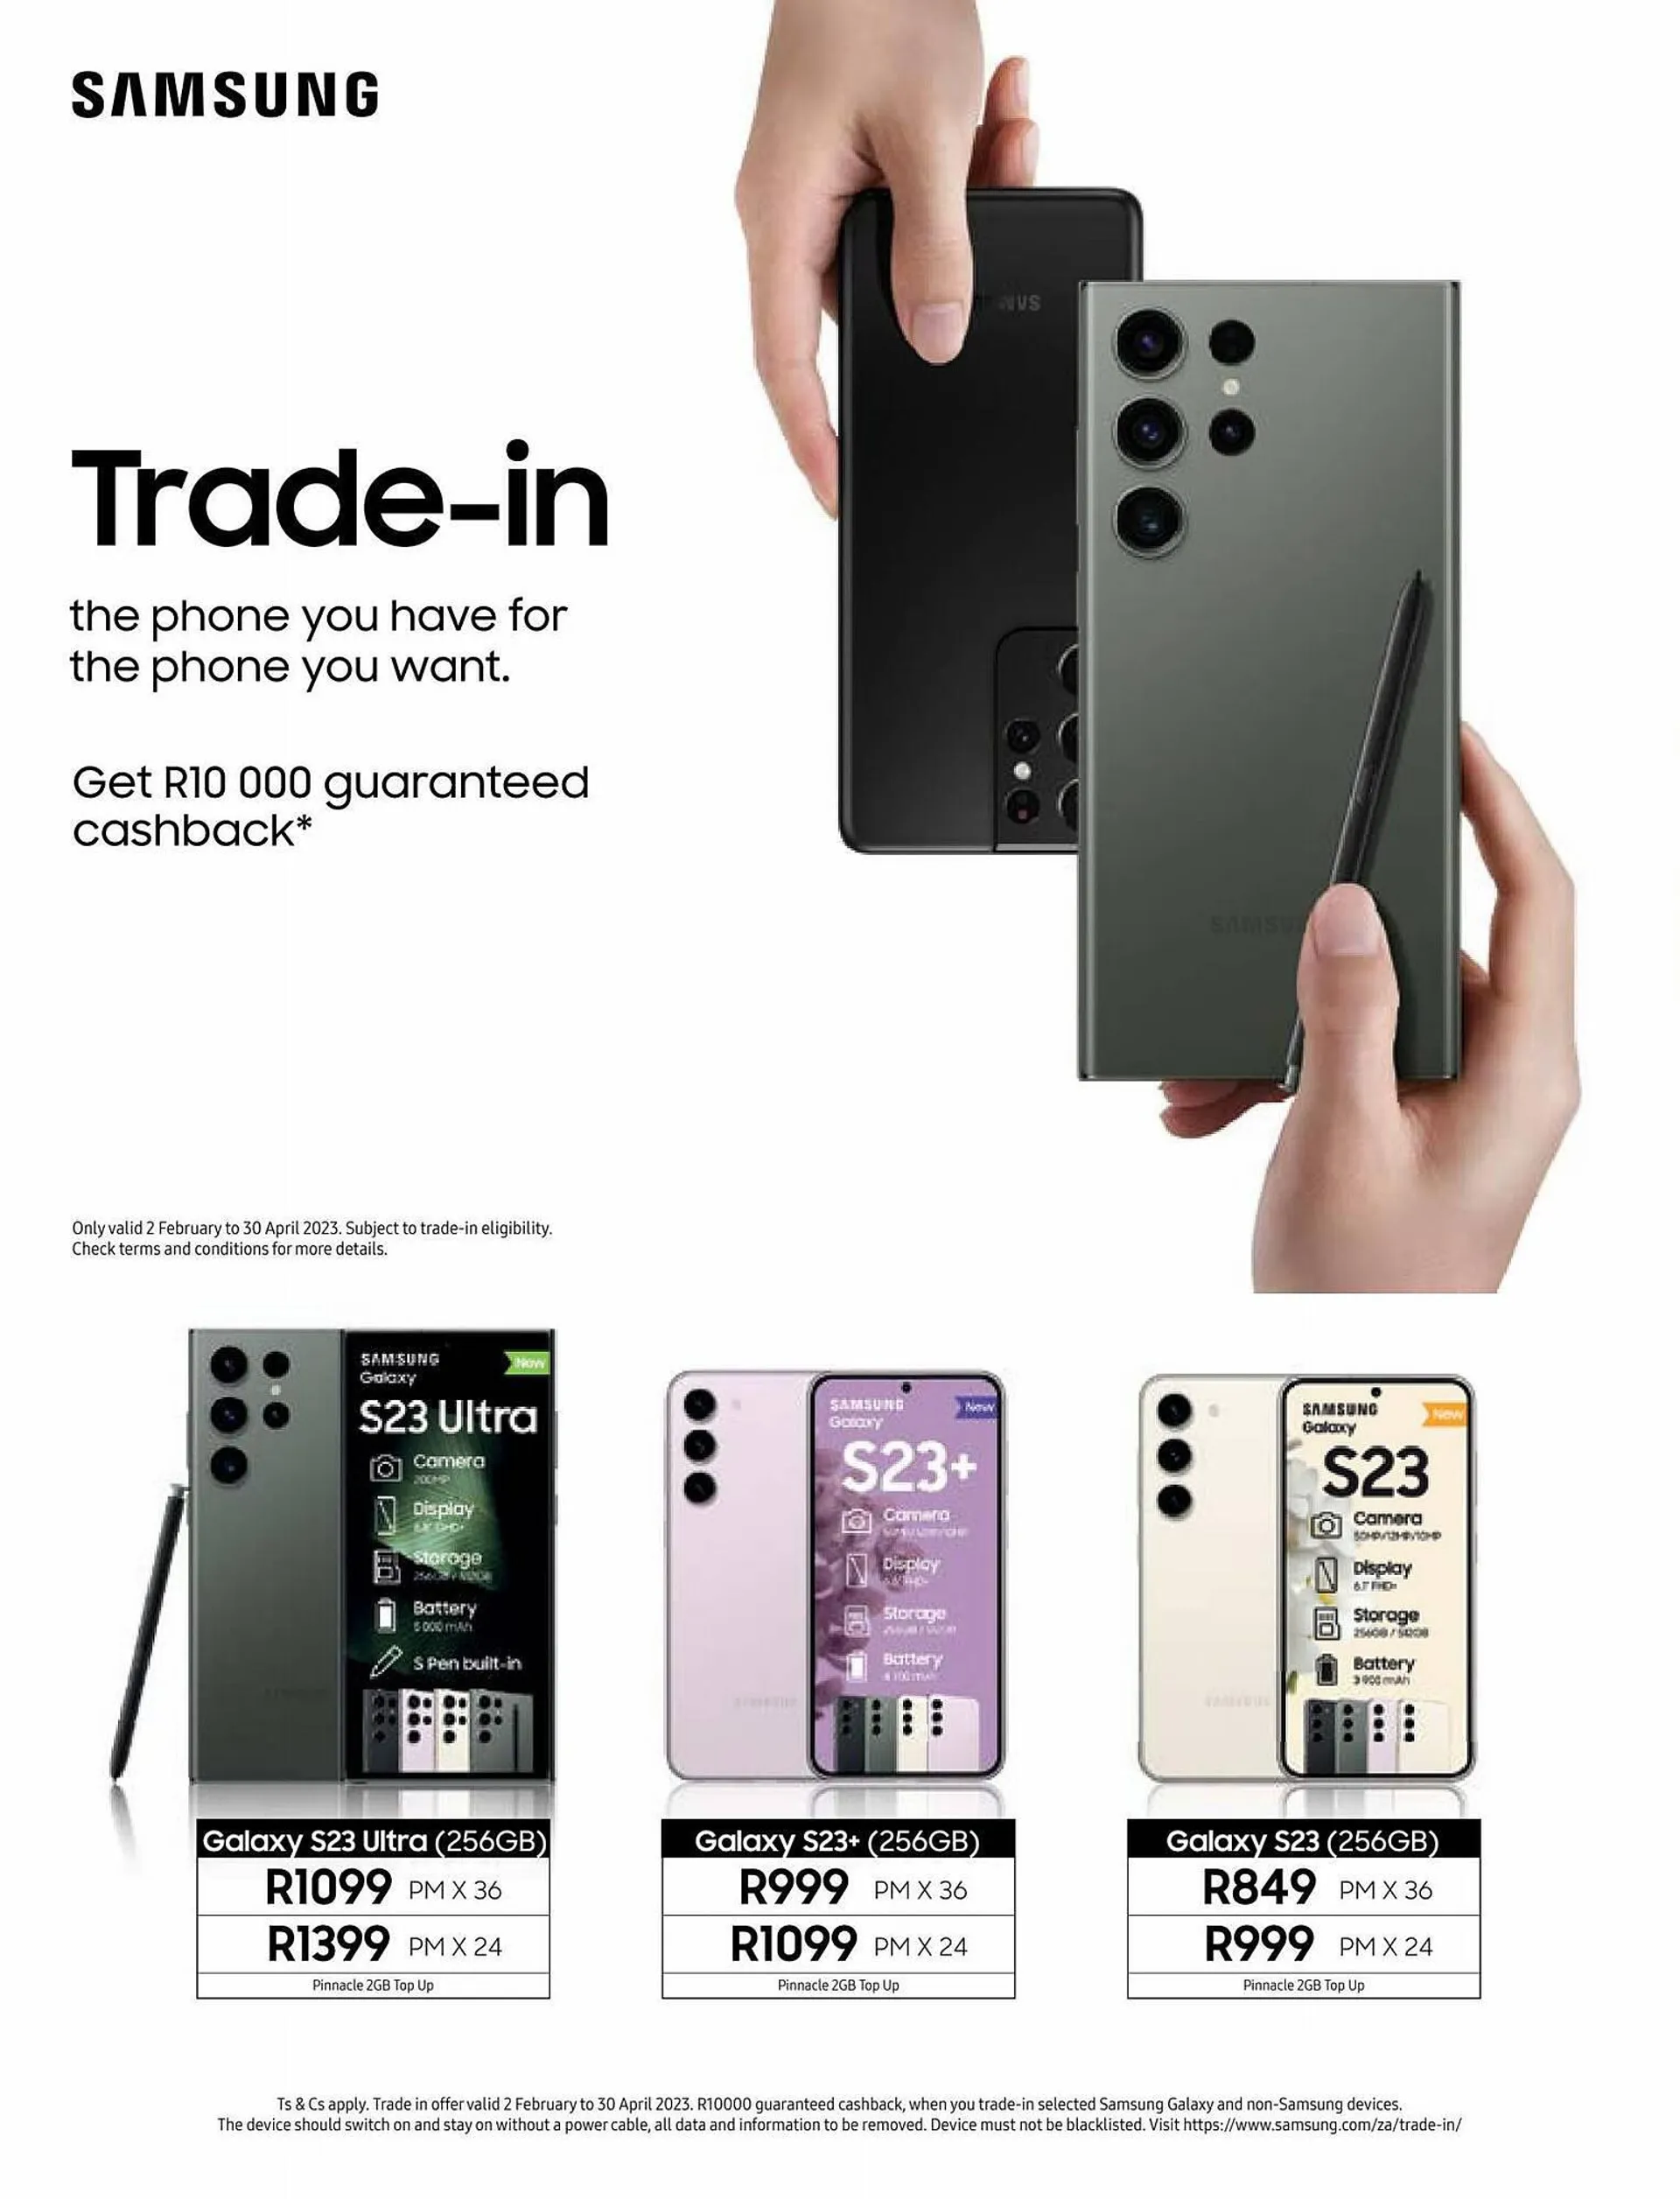 Cell C catalogue - 2